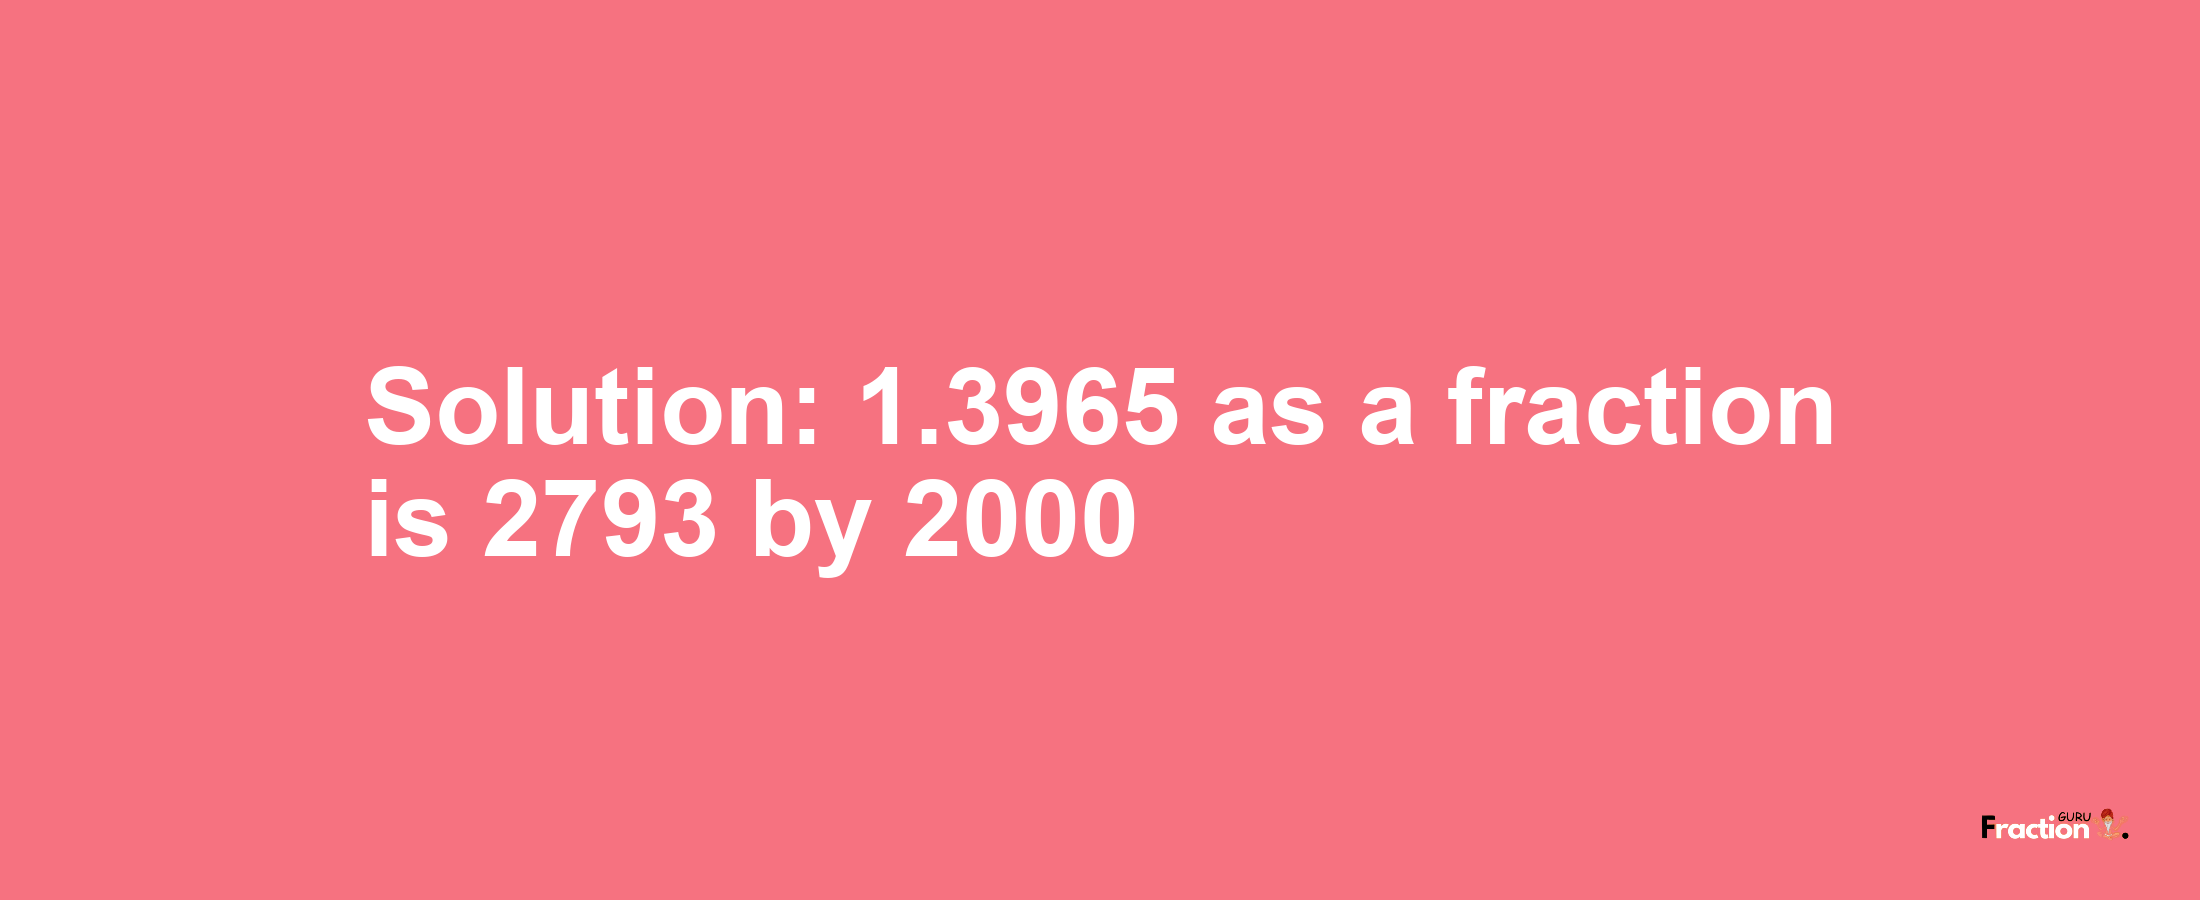 Solution:1.3965 as a fraction is 2793/2000